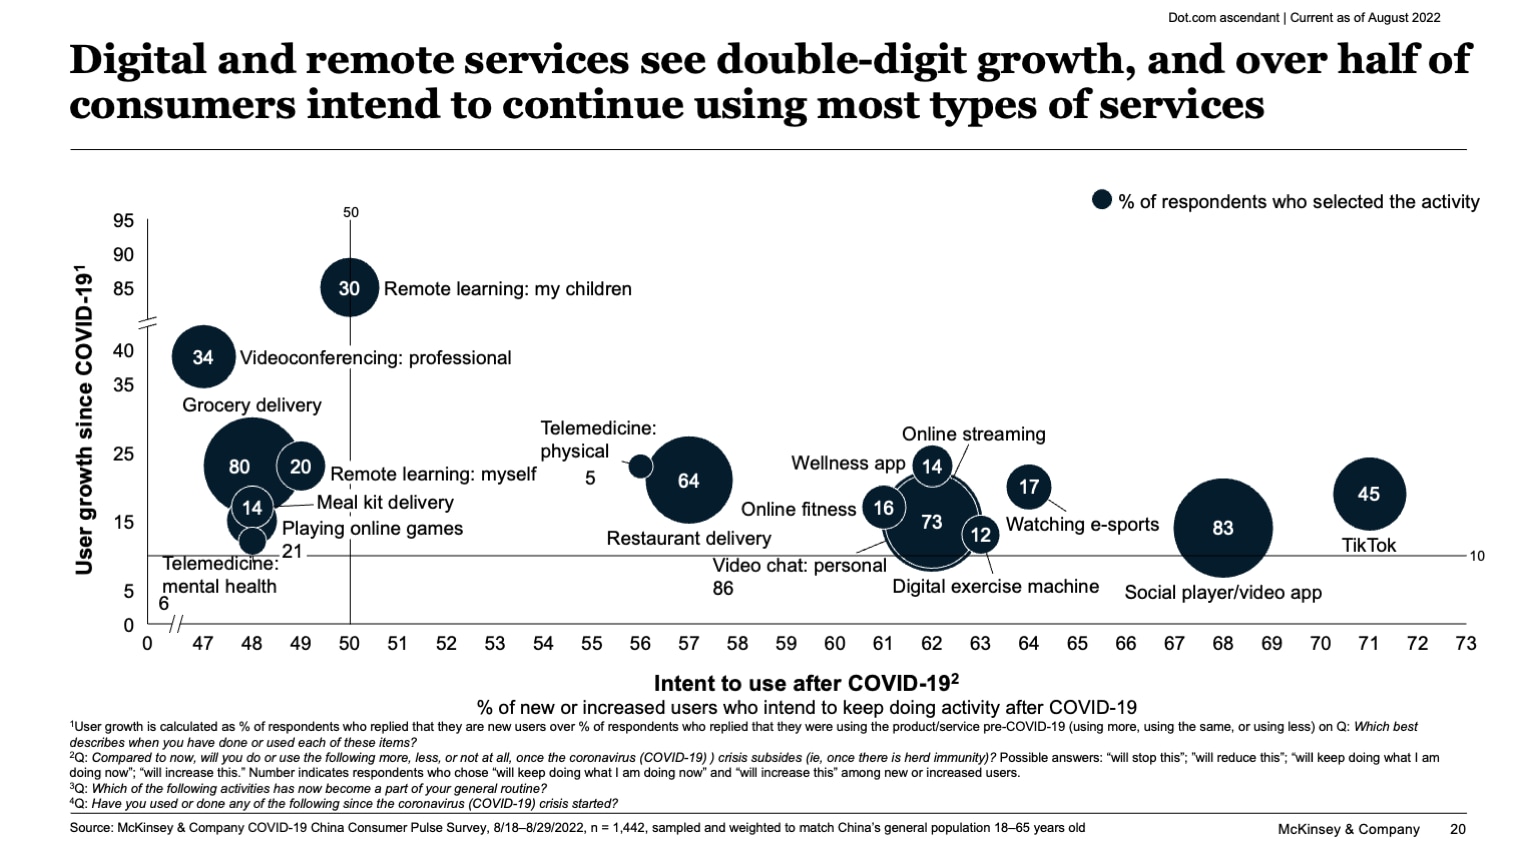 Digital and remote services see double-digit growth, and over half of consumers intend to continue using most types of services